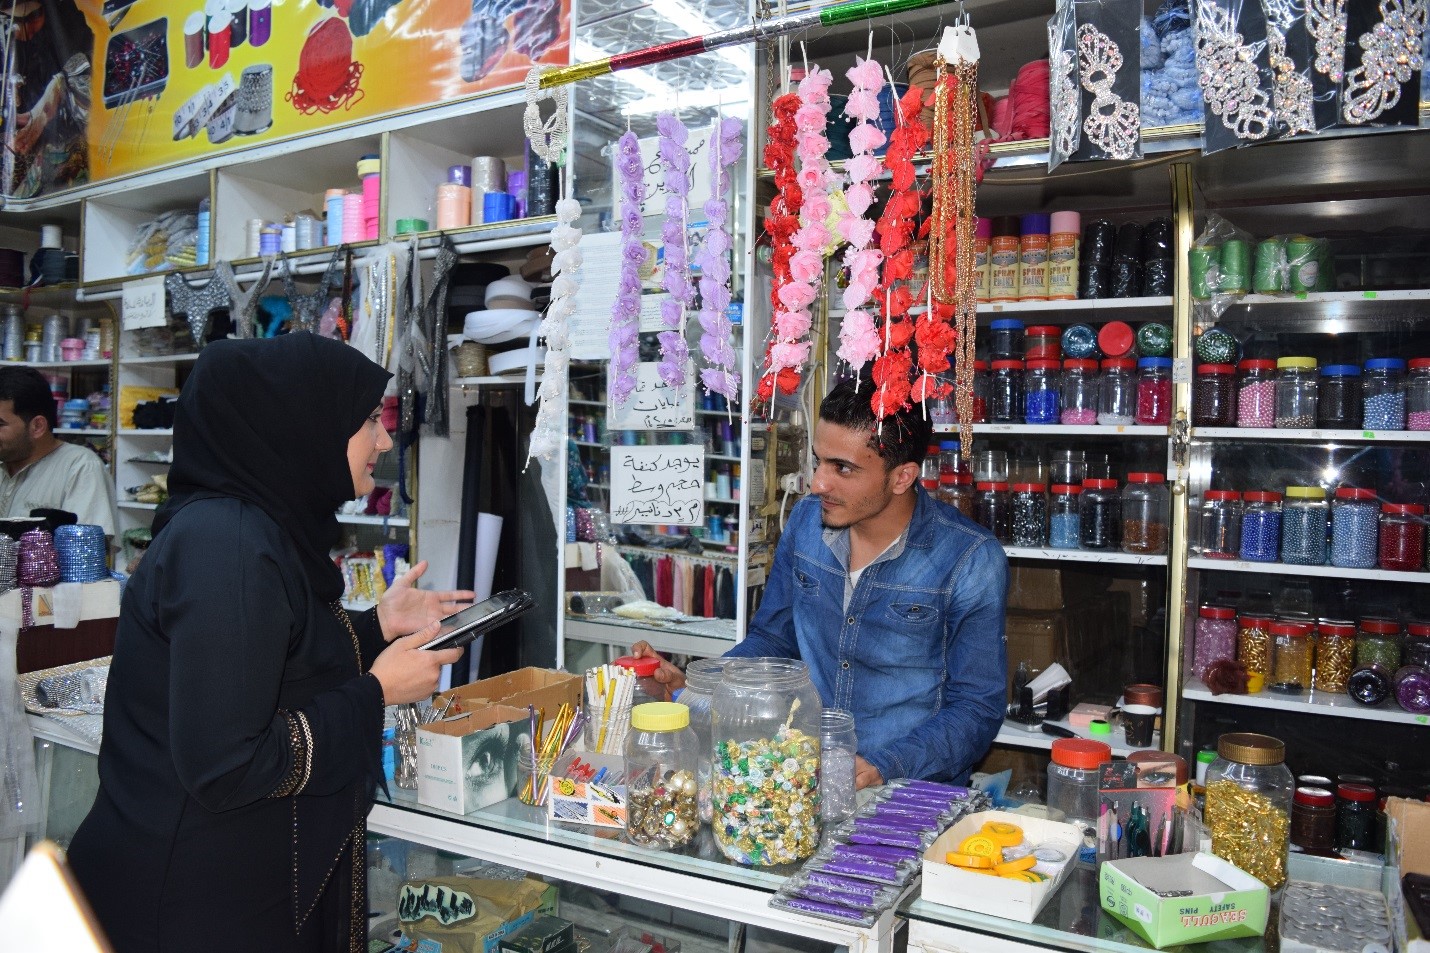 IRI Citizen Committee member surveying a shopkeeper about the local issues he cares most about